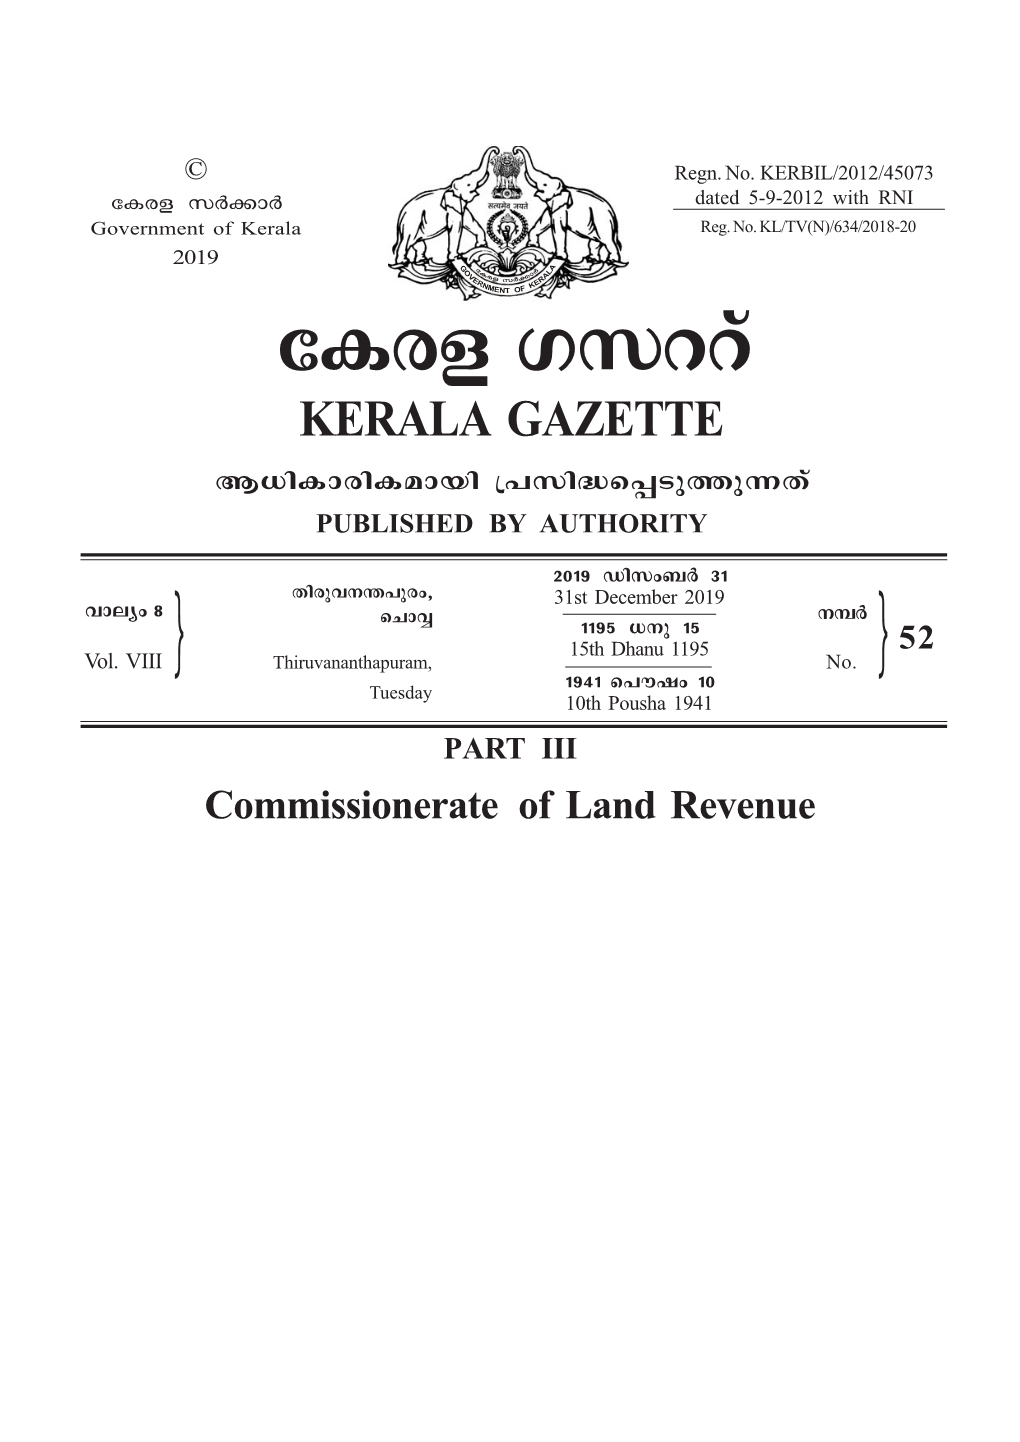 Kodungallur Taluk Poomangalam Village Has Filed an Application for a Legal ]Ckyw Heirship Certificate in Respect of the Legal Heirs of His Wife (1) Sumathy, P